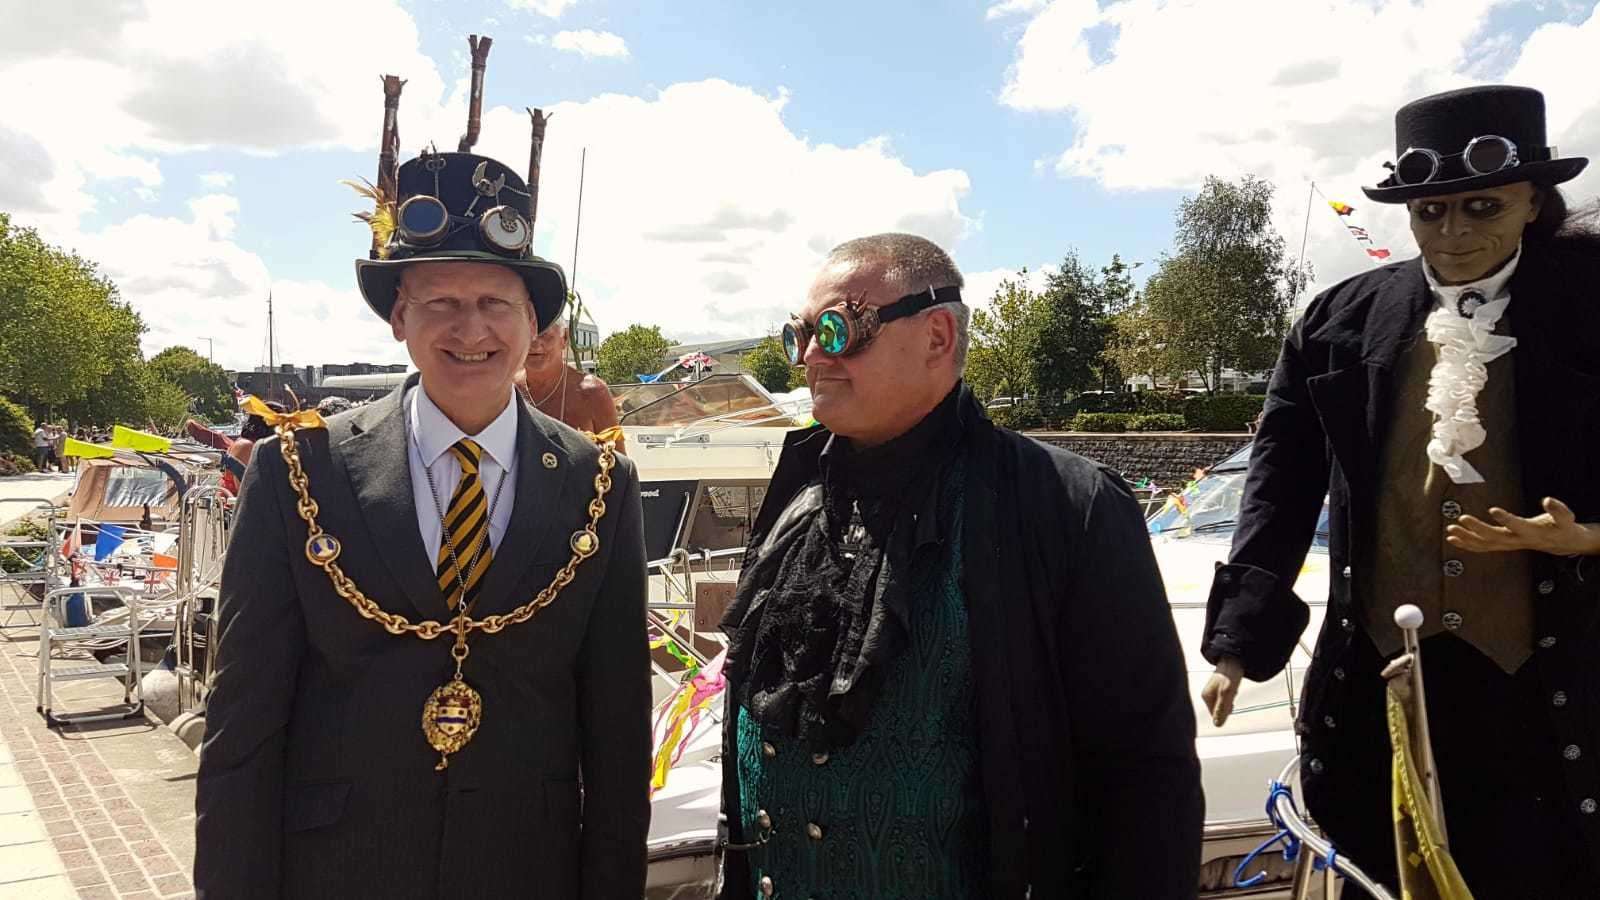 Dave Naghi (left) in his Steam Punk gear at Maidstone River Festival